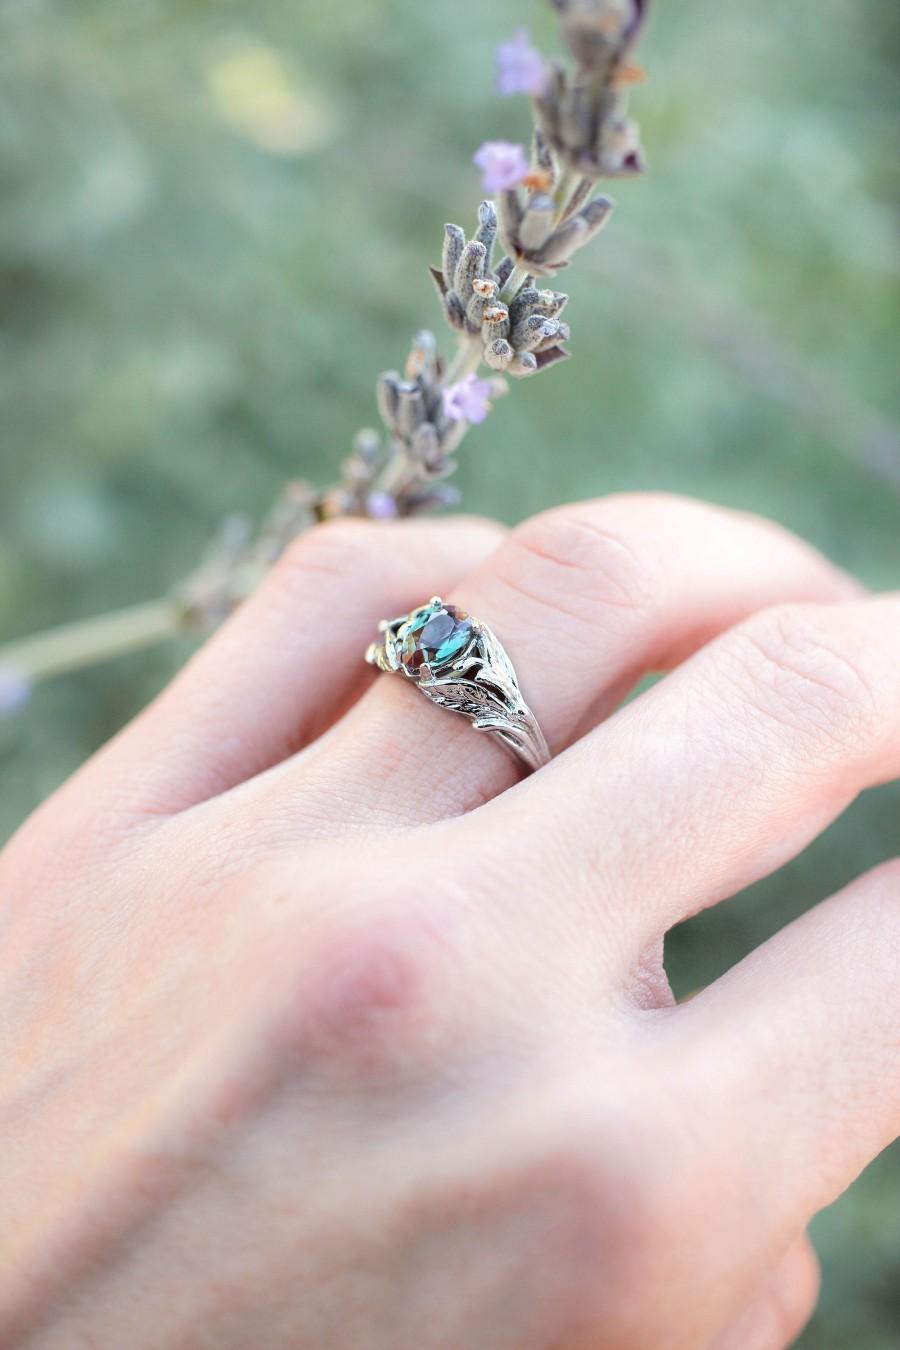 Mariage - Alexandrite engagement ring, white gold leaves ring, leaf and branch ring for woman, unique engagement ring, lab alexandrite, nature ring